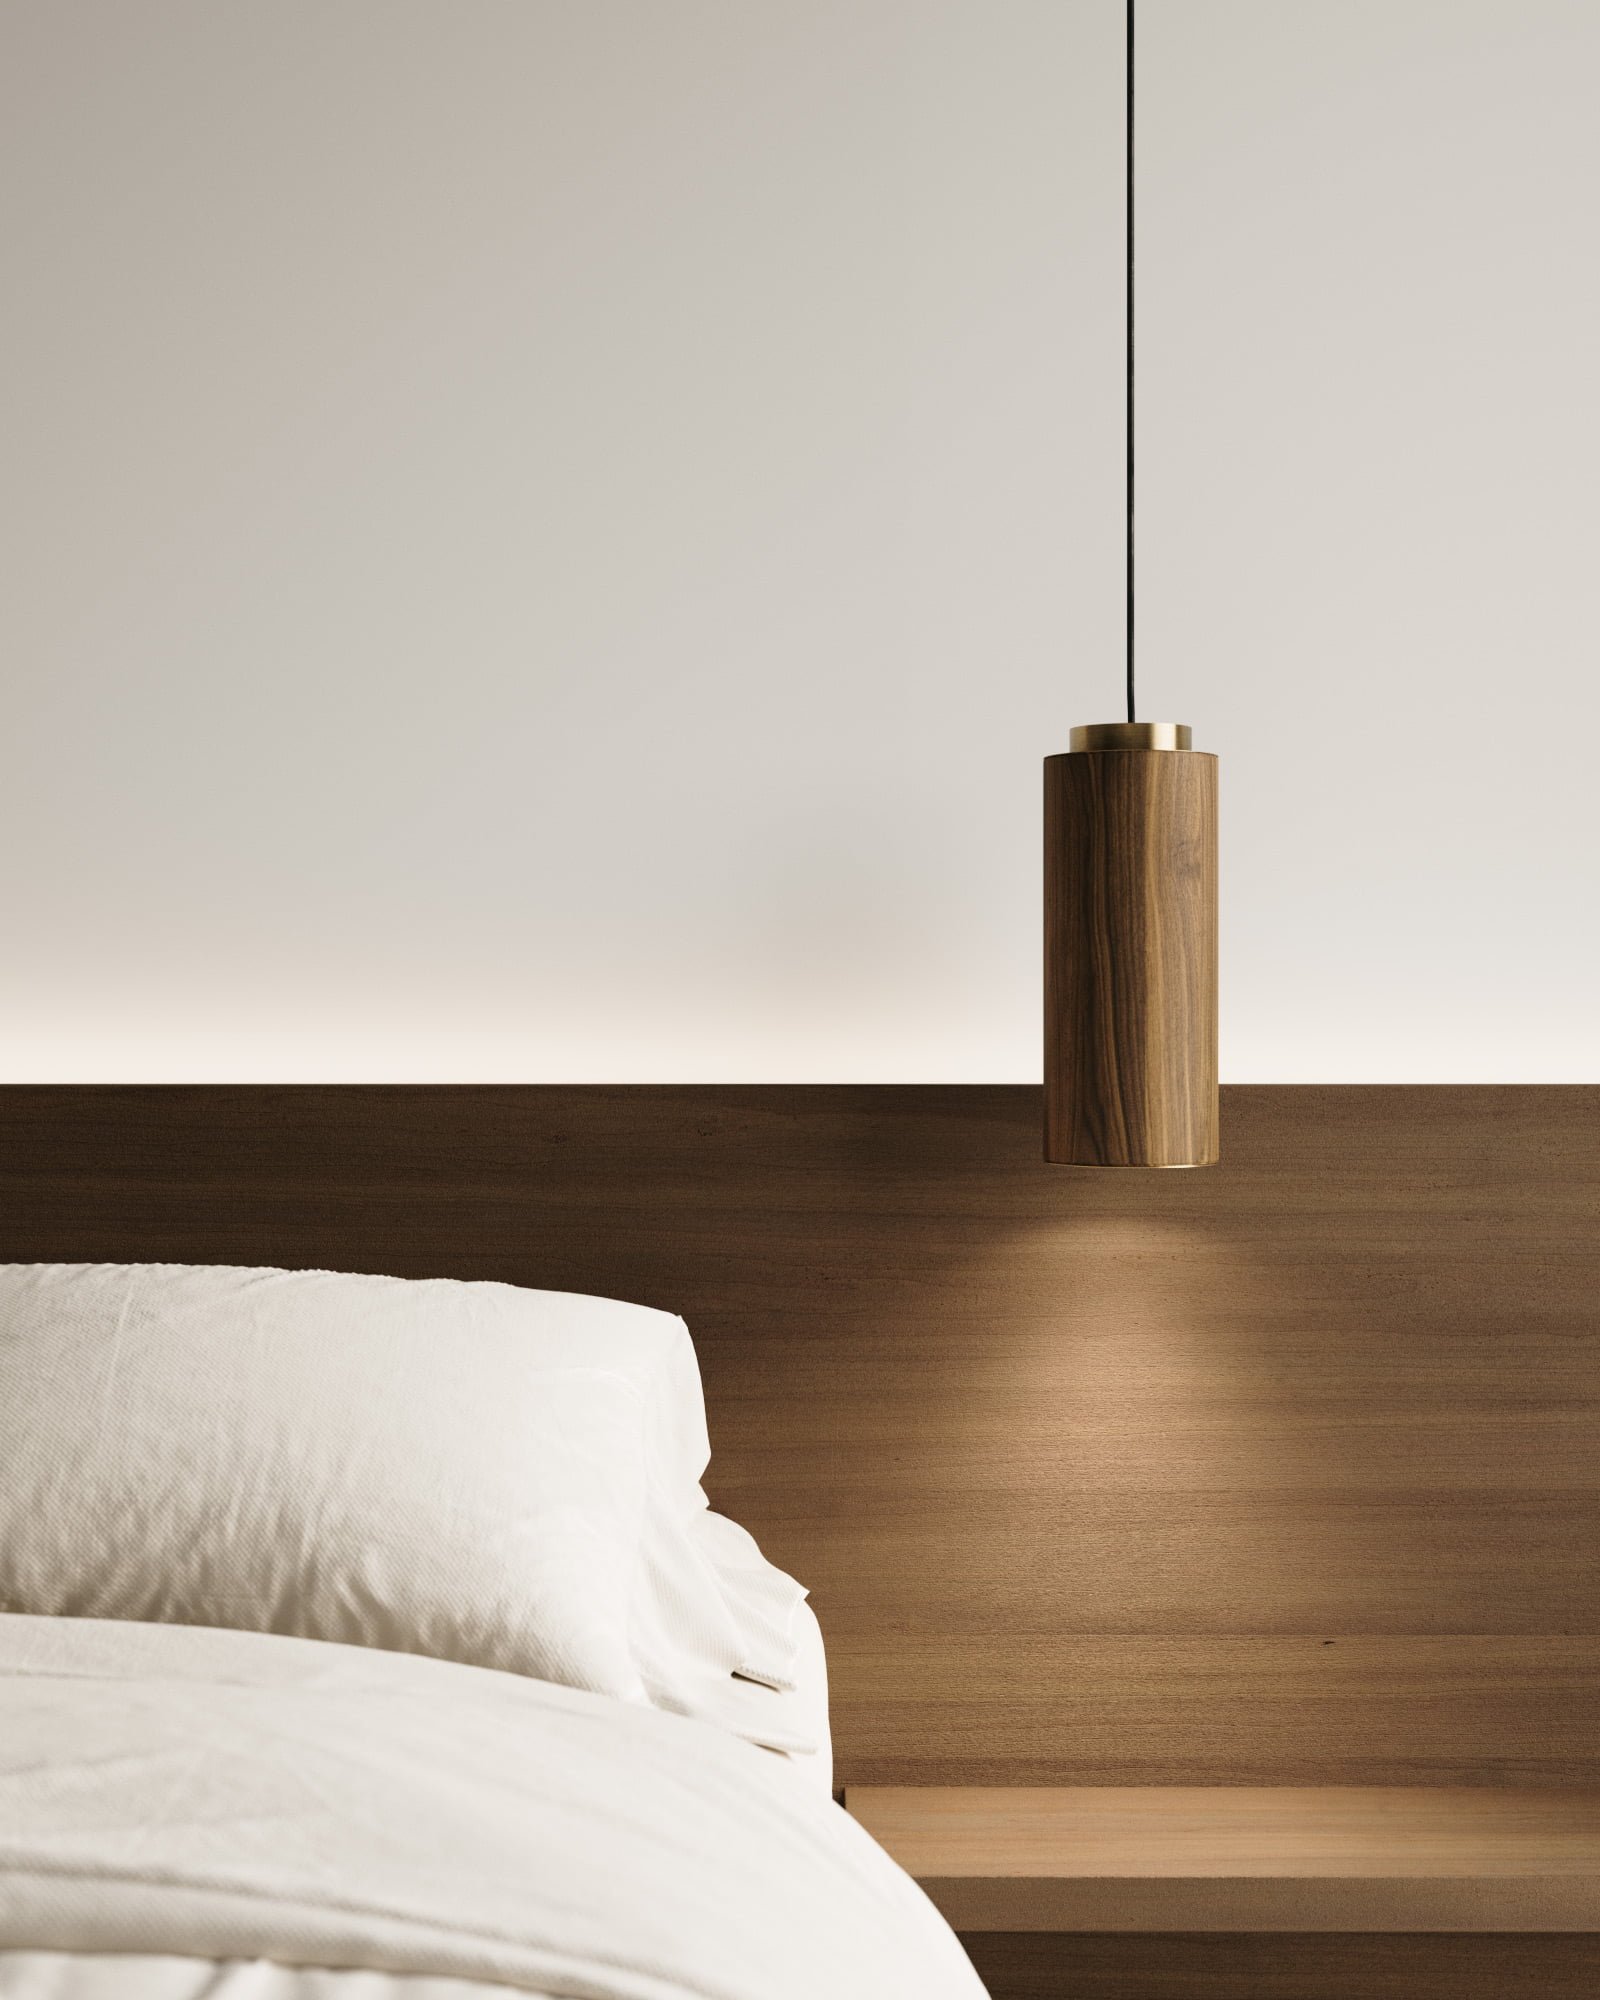 TEMPLE modern hanging lamp made of wood designed by Bandido Studio in the room.